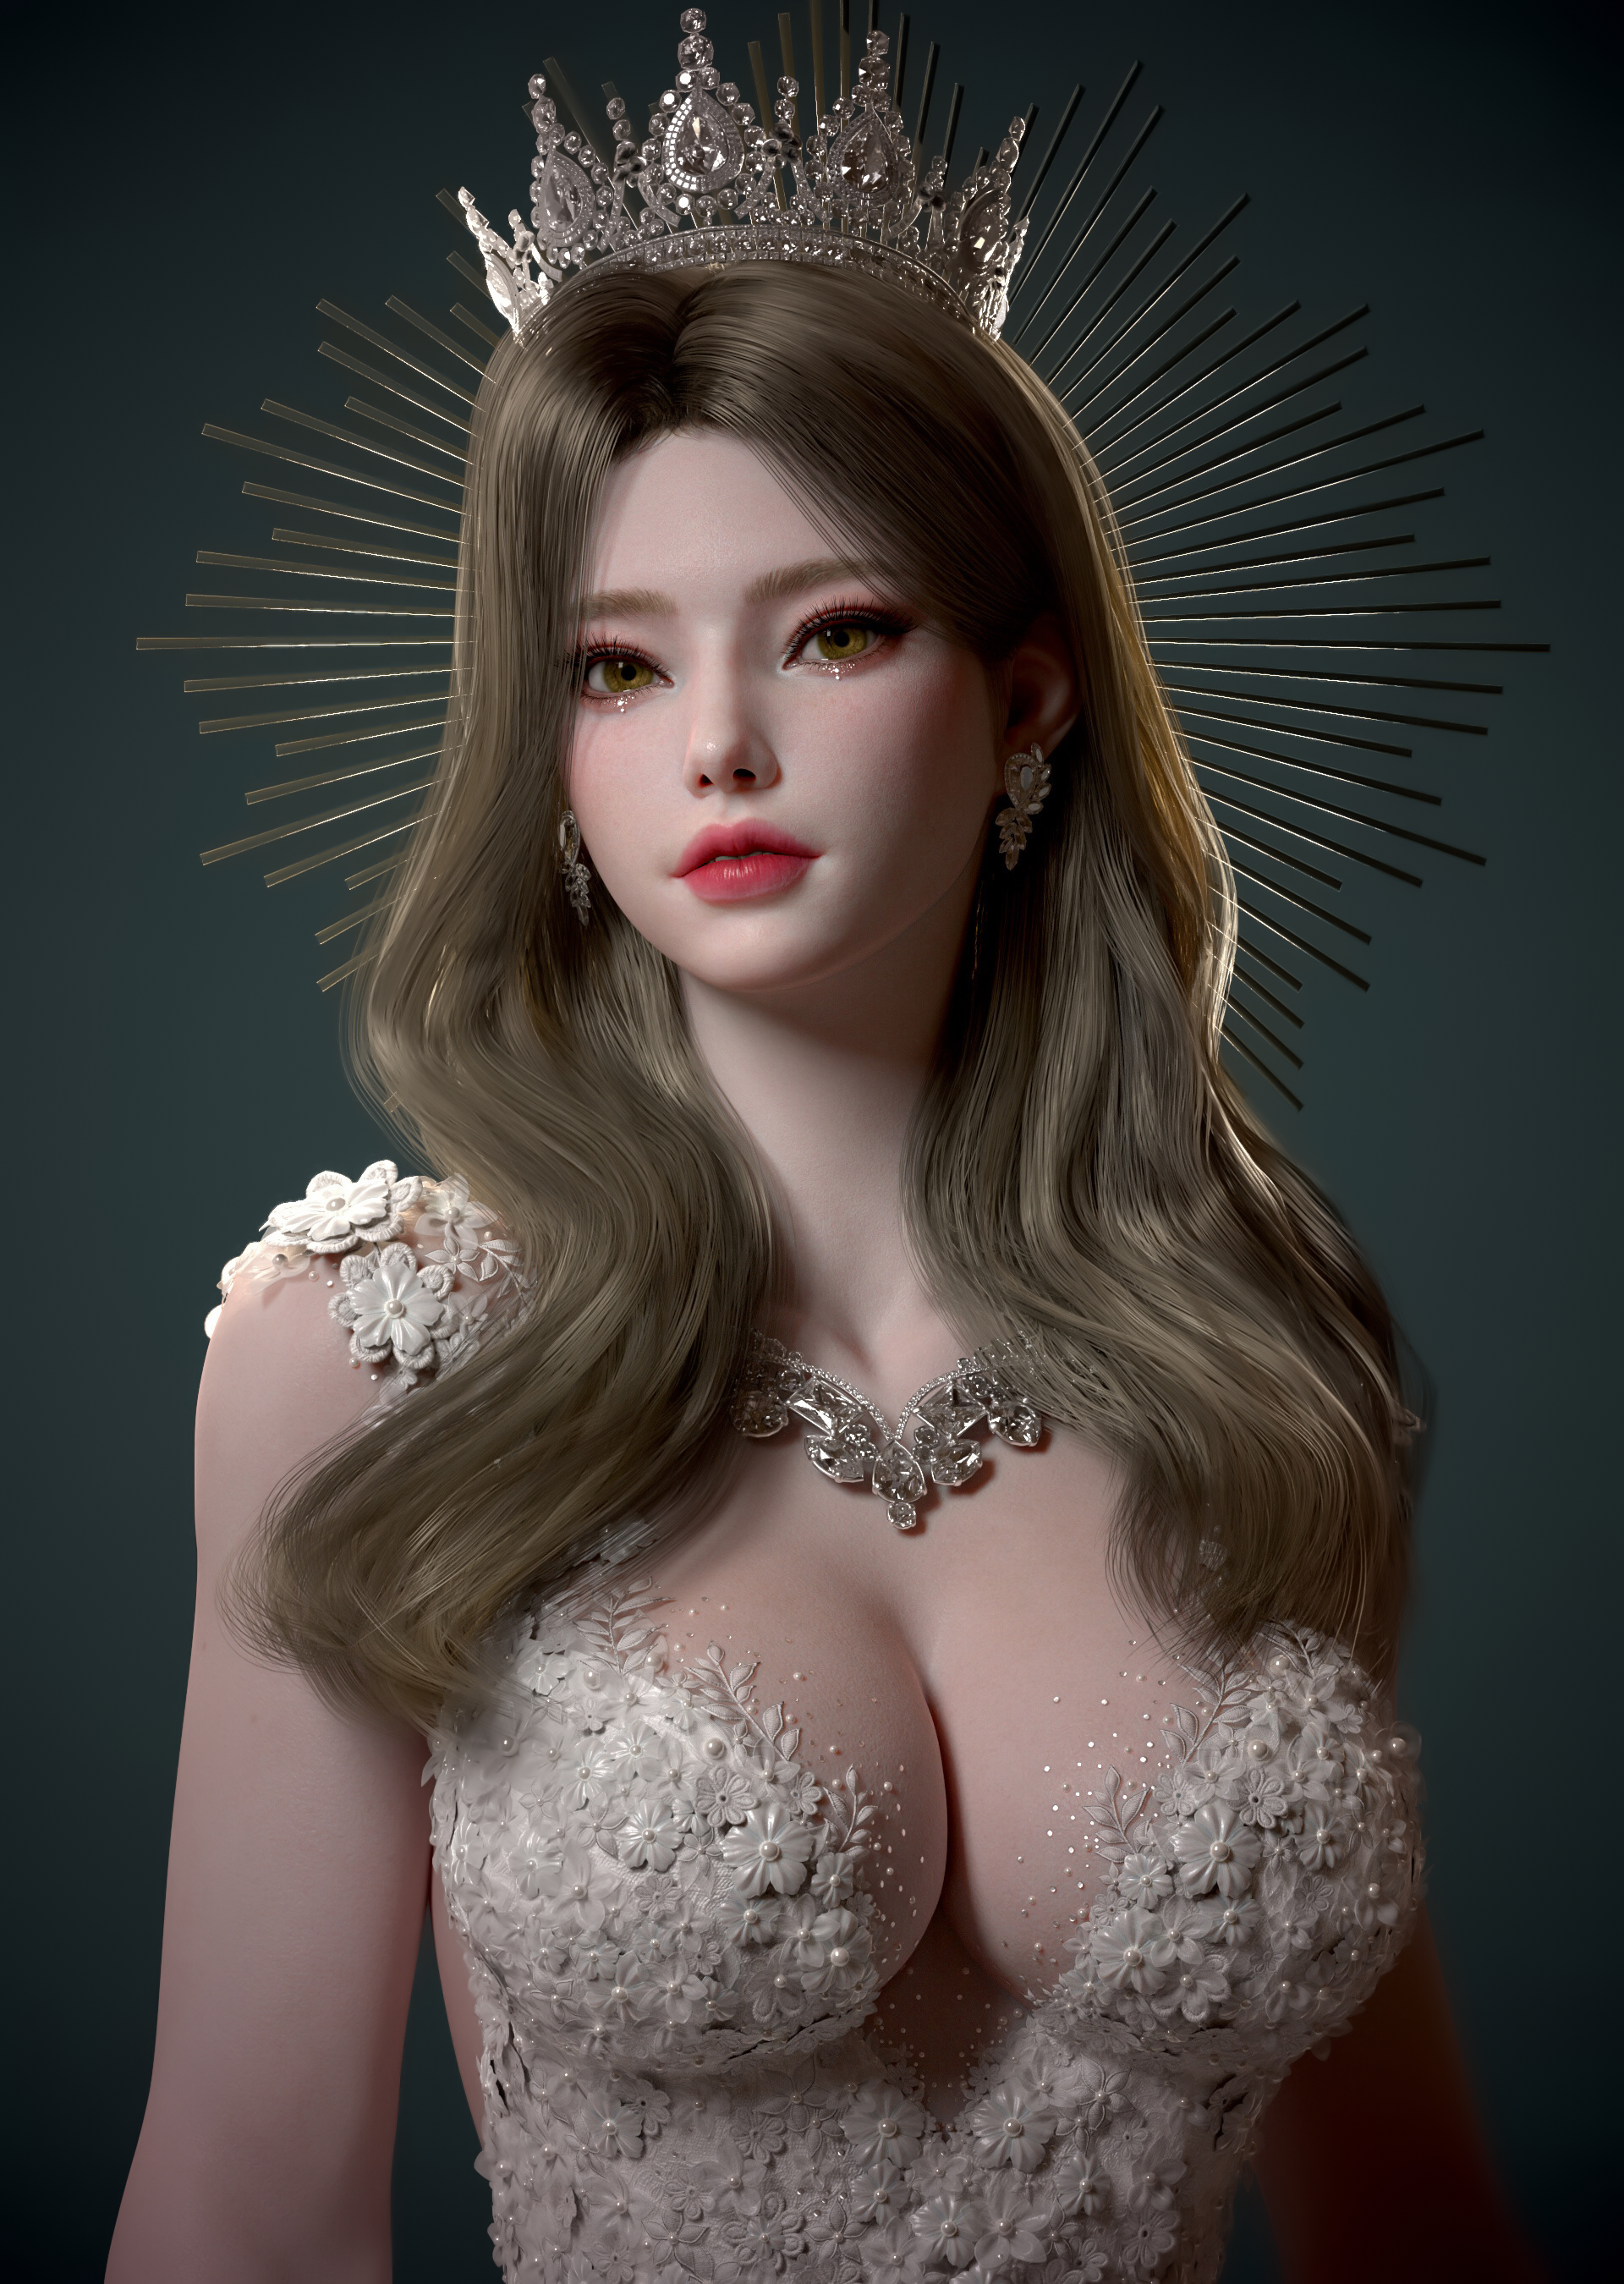 Su Jung CGi Women Brunette Crown Long Hair Makeup Wavy Hair Jewelry Necklace Dress White Clothing Si 1920x2700